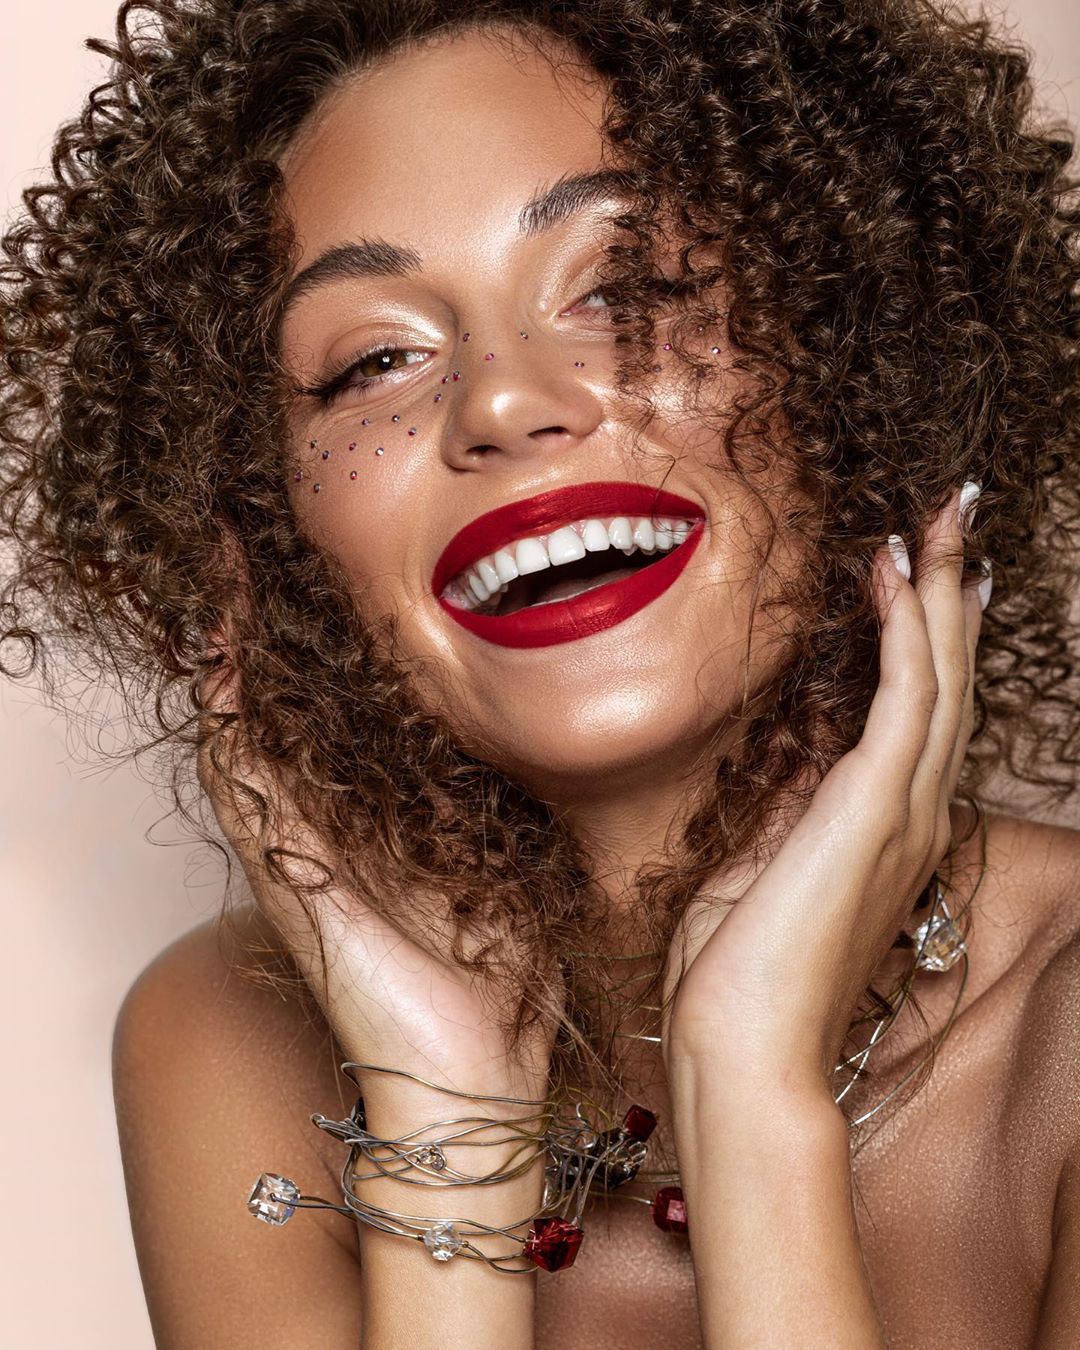 Beautiful Lady With Curly Hair And Red Lips